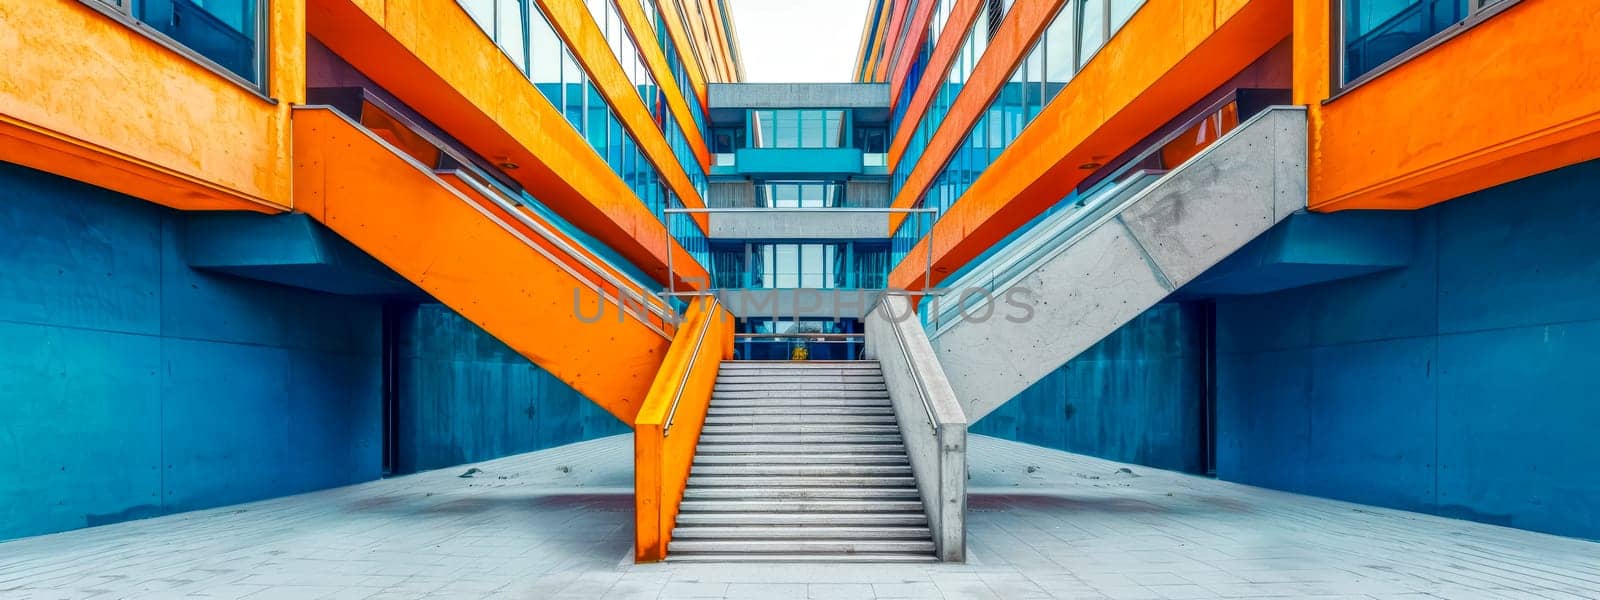 Modern urban architecture with colorful facades and stairs by Edophoto